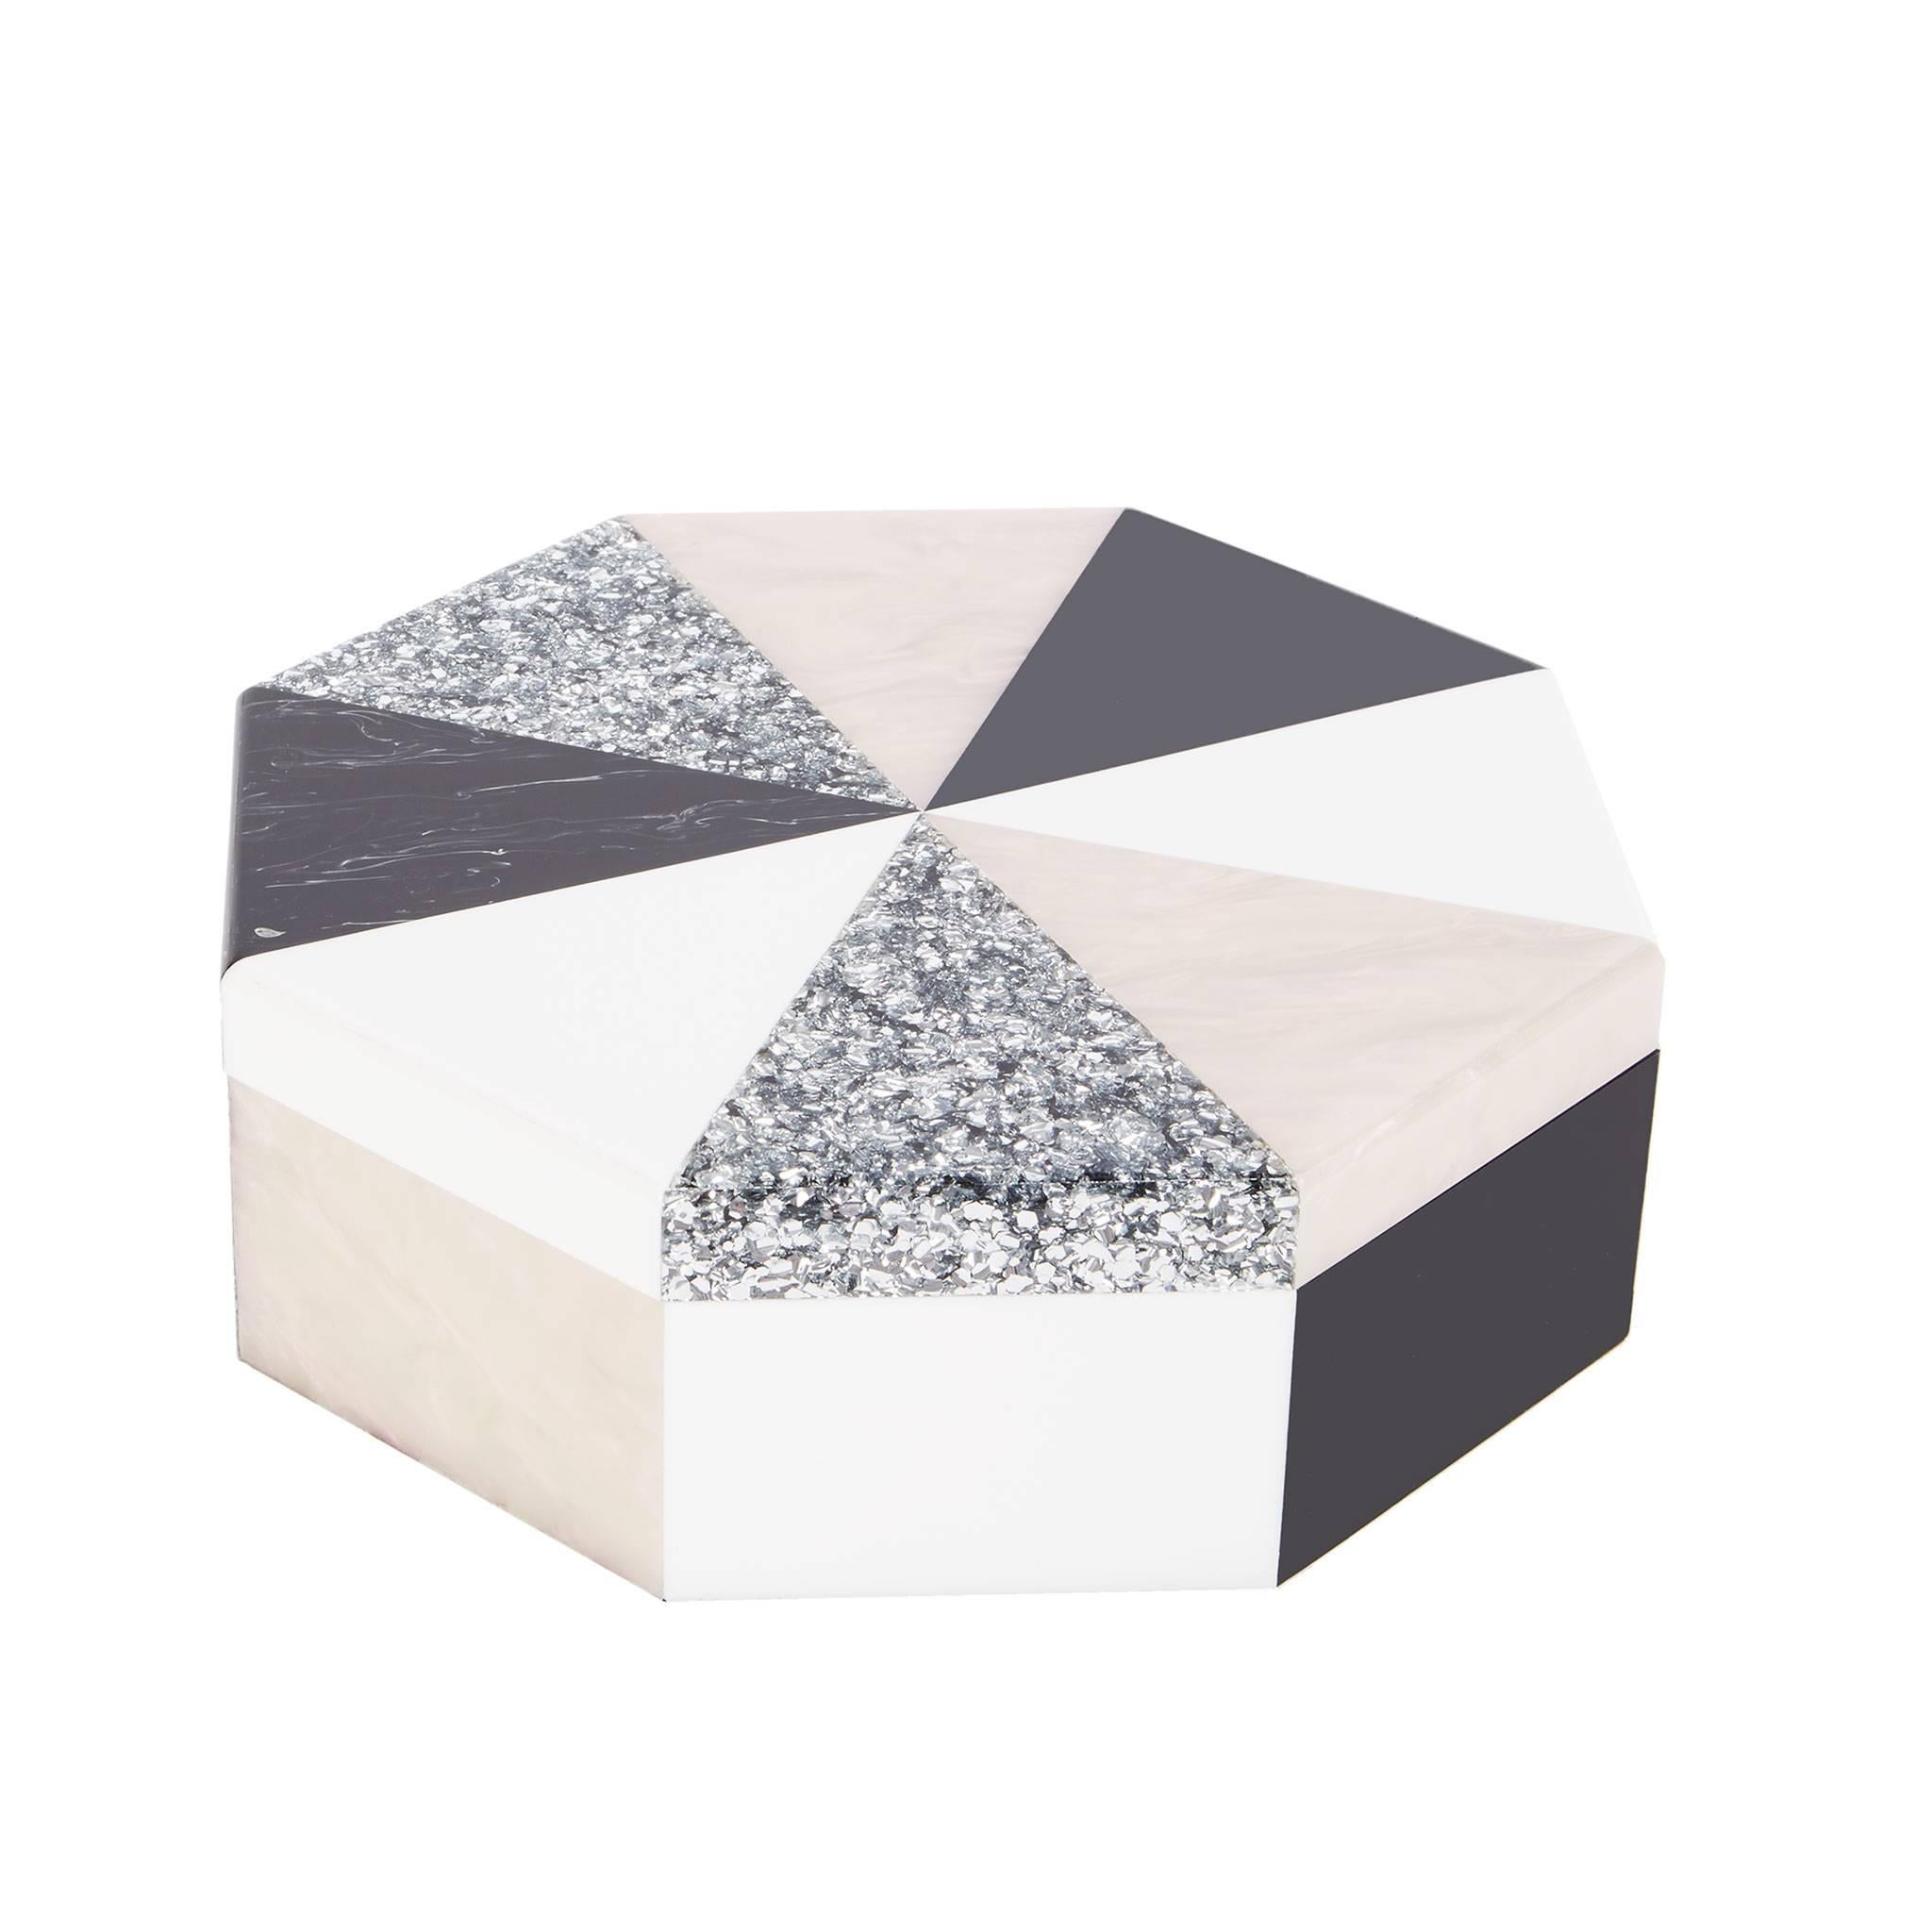 Edie Parker Home Octagon Box in Silver Confetti, White, Wonderstone and Abalone For Sale